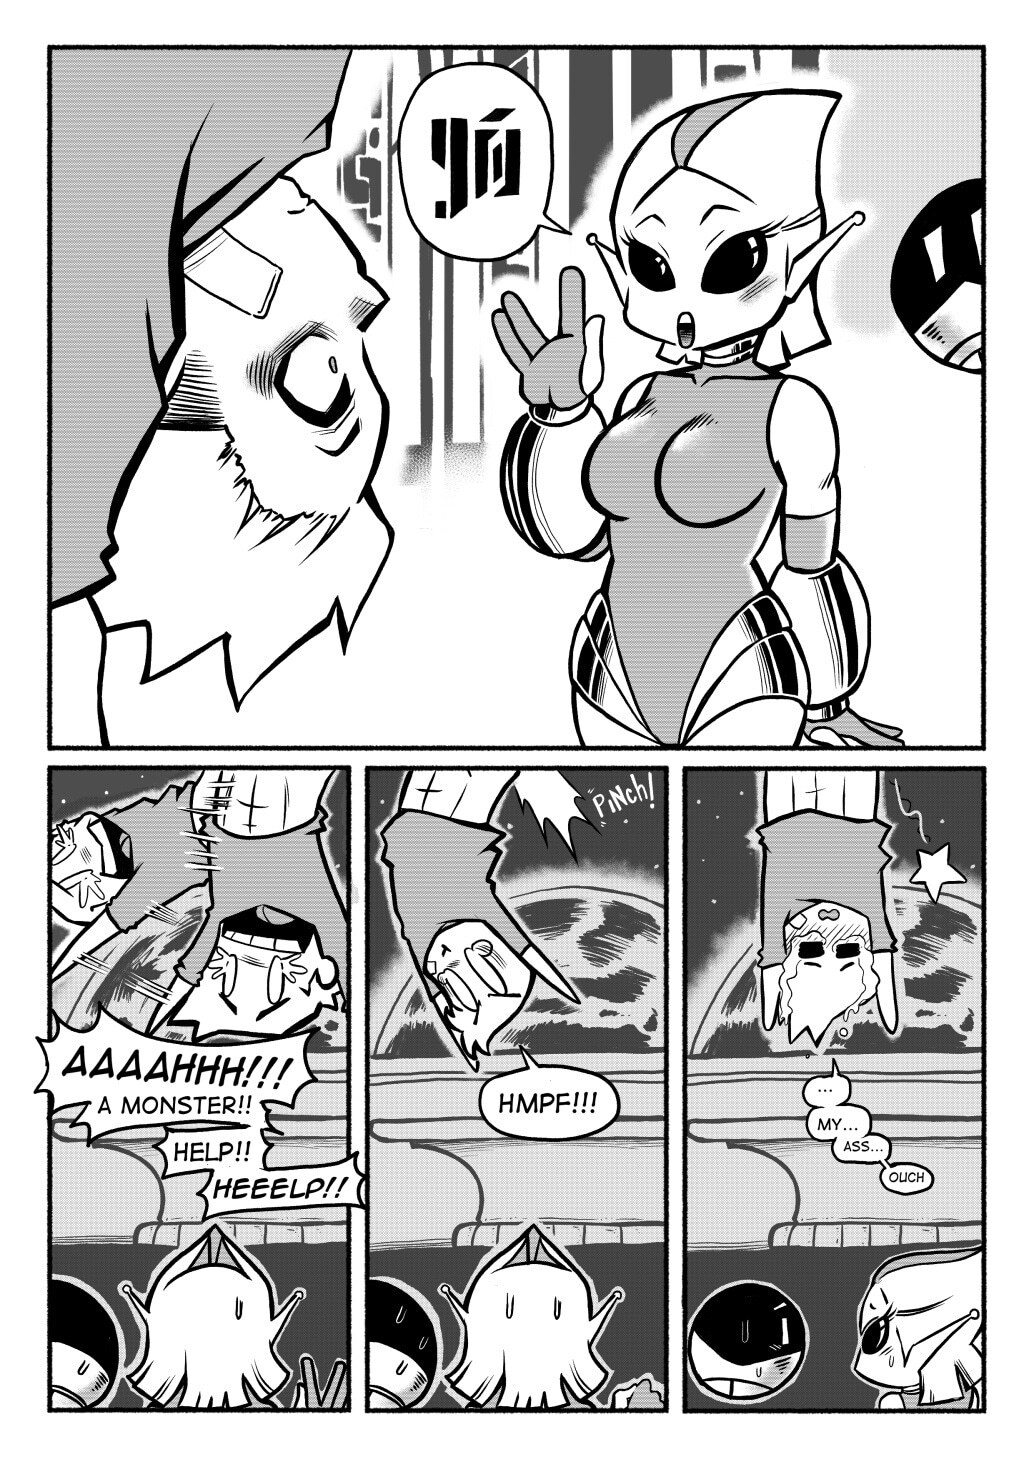 Abducted! - Mr.E - Page 5